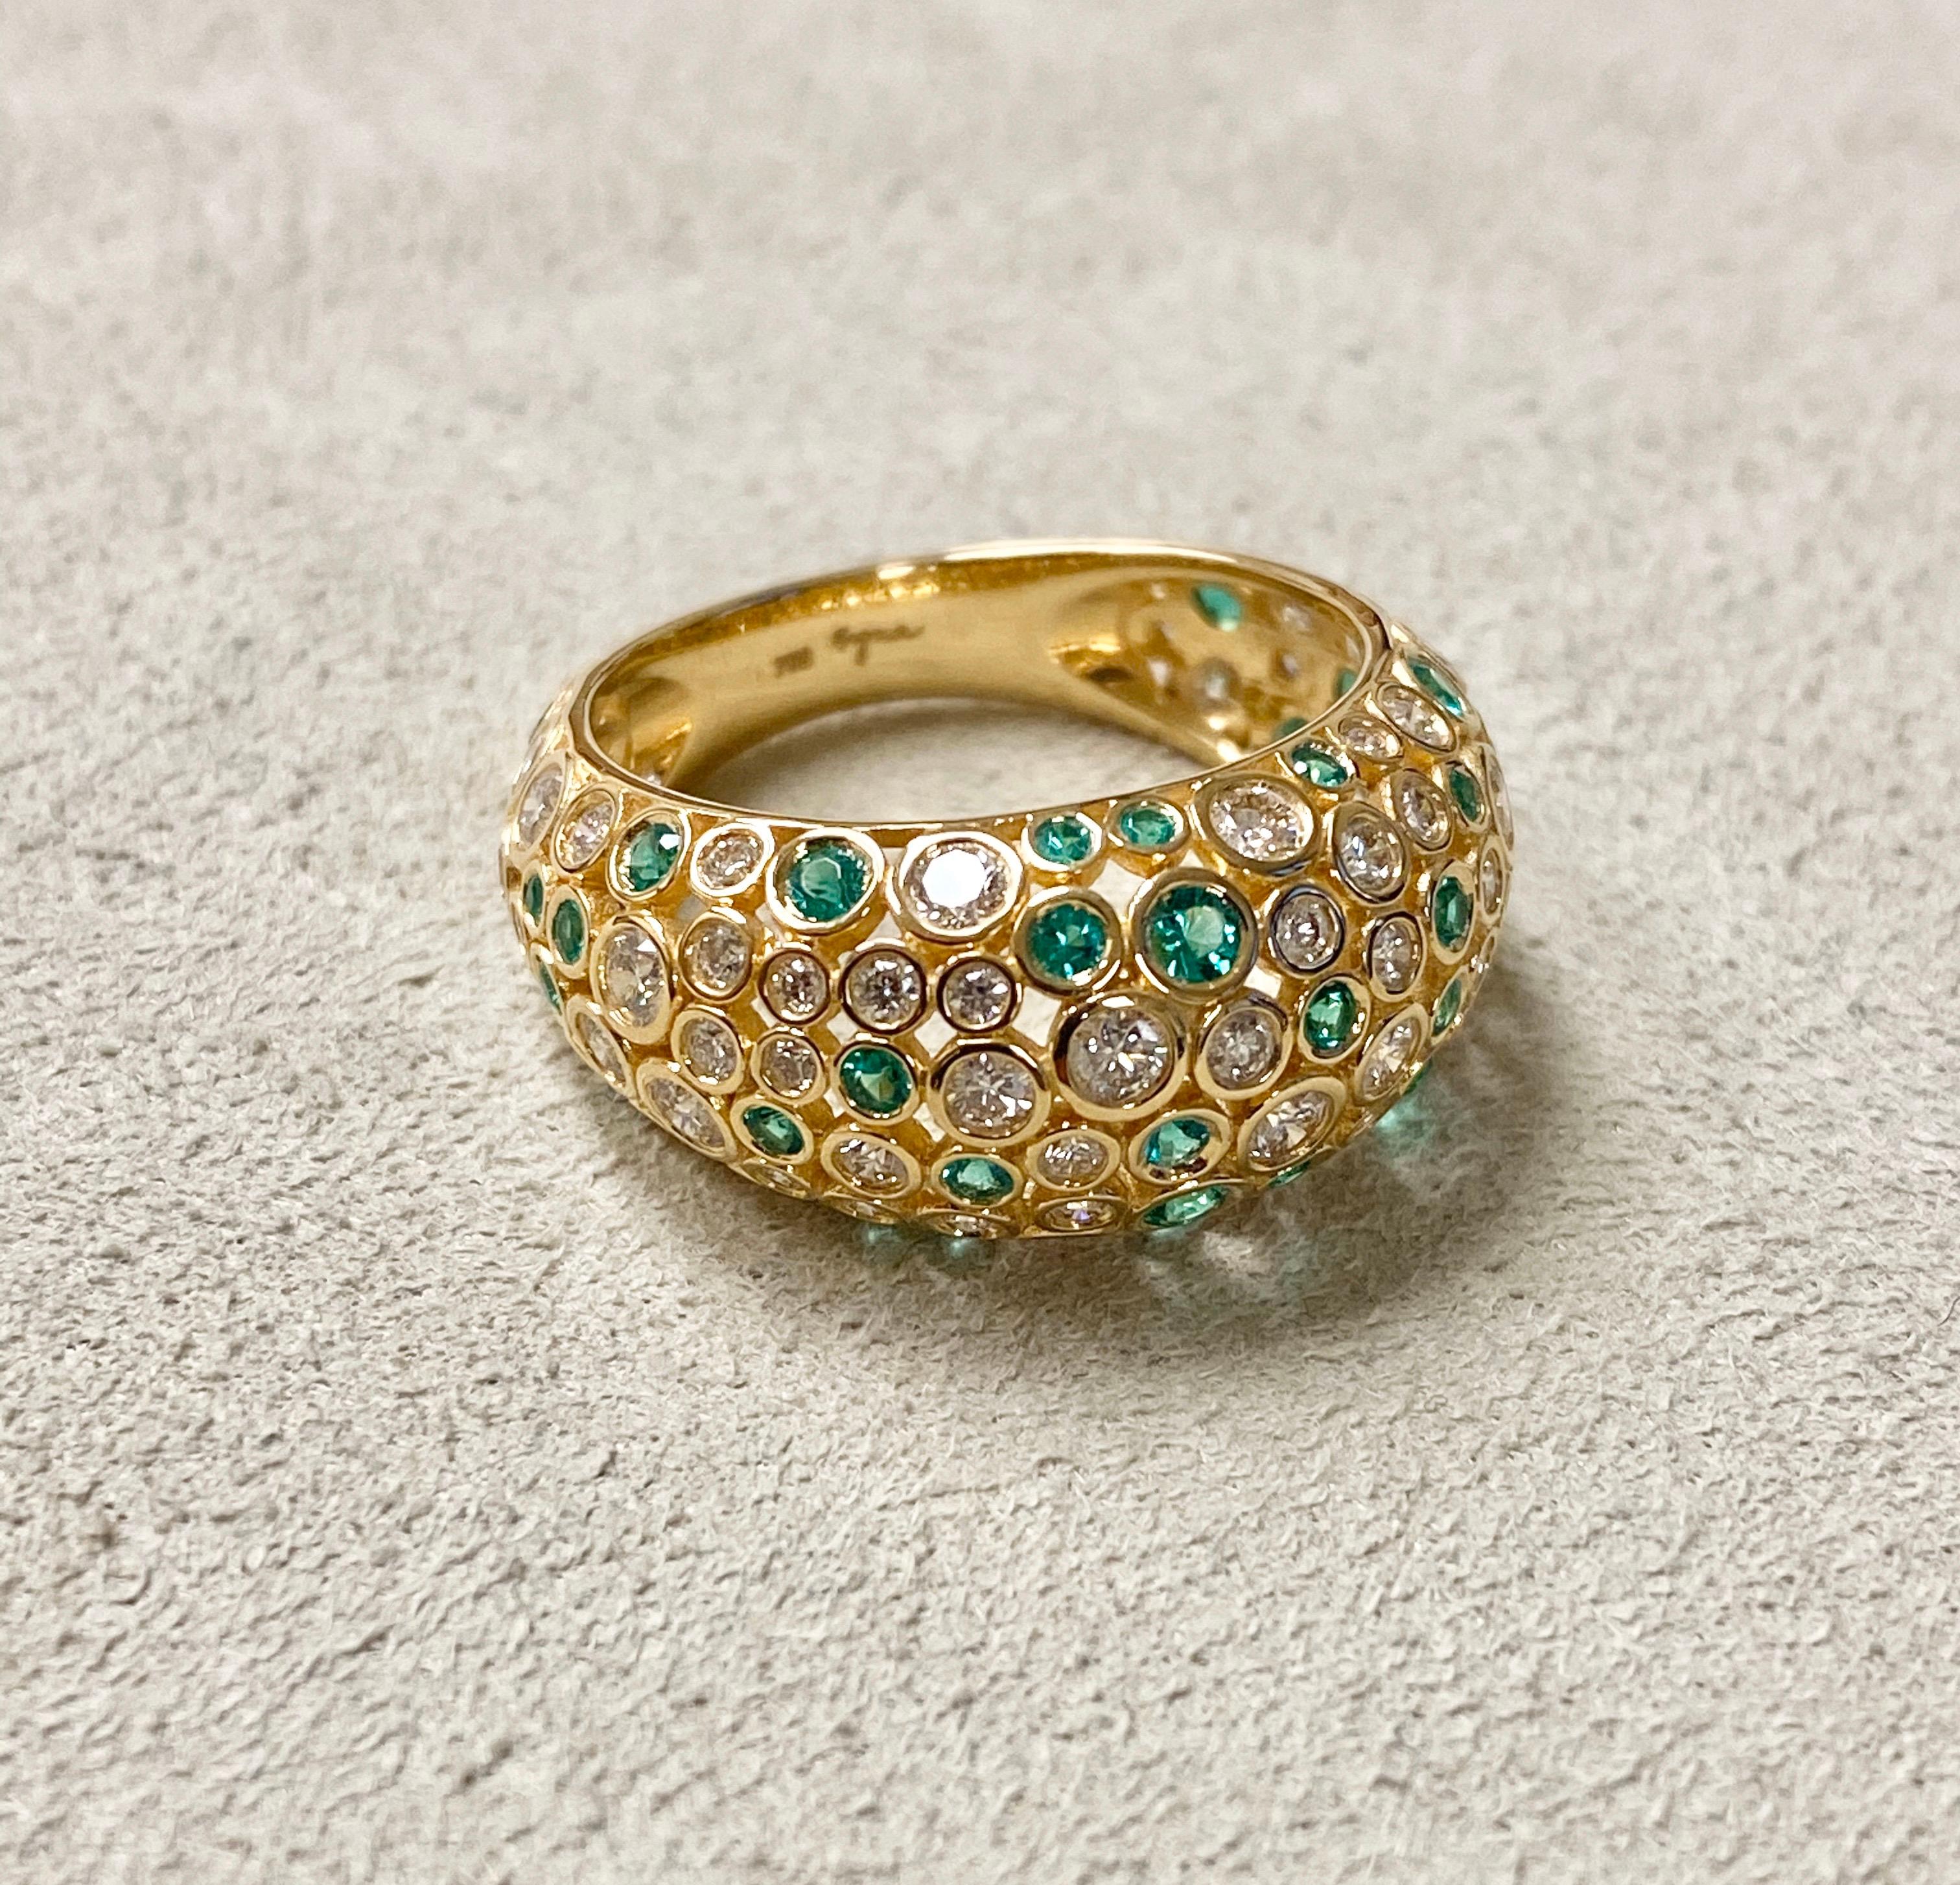 Created in 18 karat yellow gold
Diamonds 1.20 ct approx
Emeralds 0.55 cts approx
Ring size US 6.5, can be sized up or down
Limited edition

Exquisitely crafted in 18 karat yellow gold, this limited edition ring dazzles with diamonds of 1.20 ct and